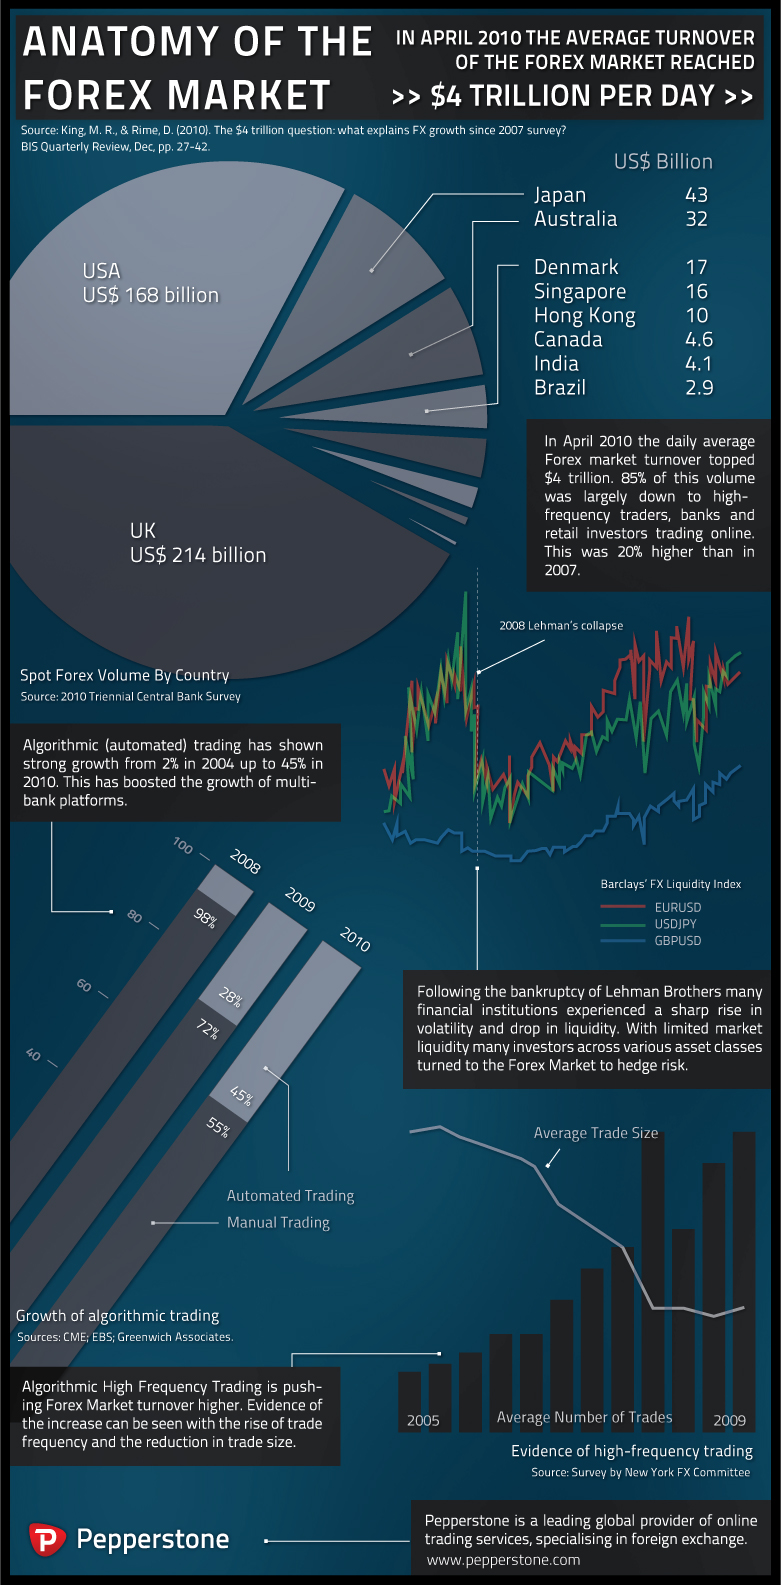 Forex trading infographic